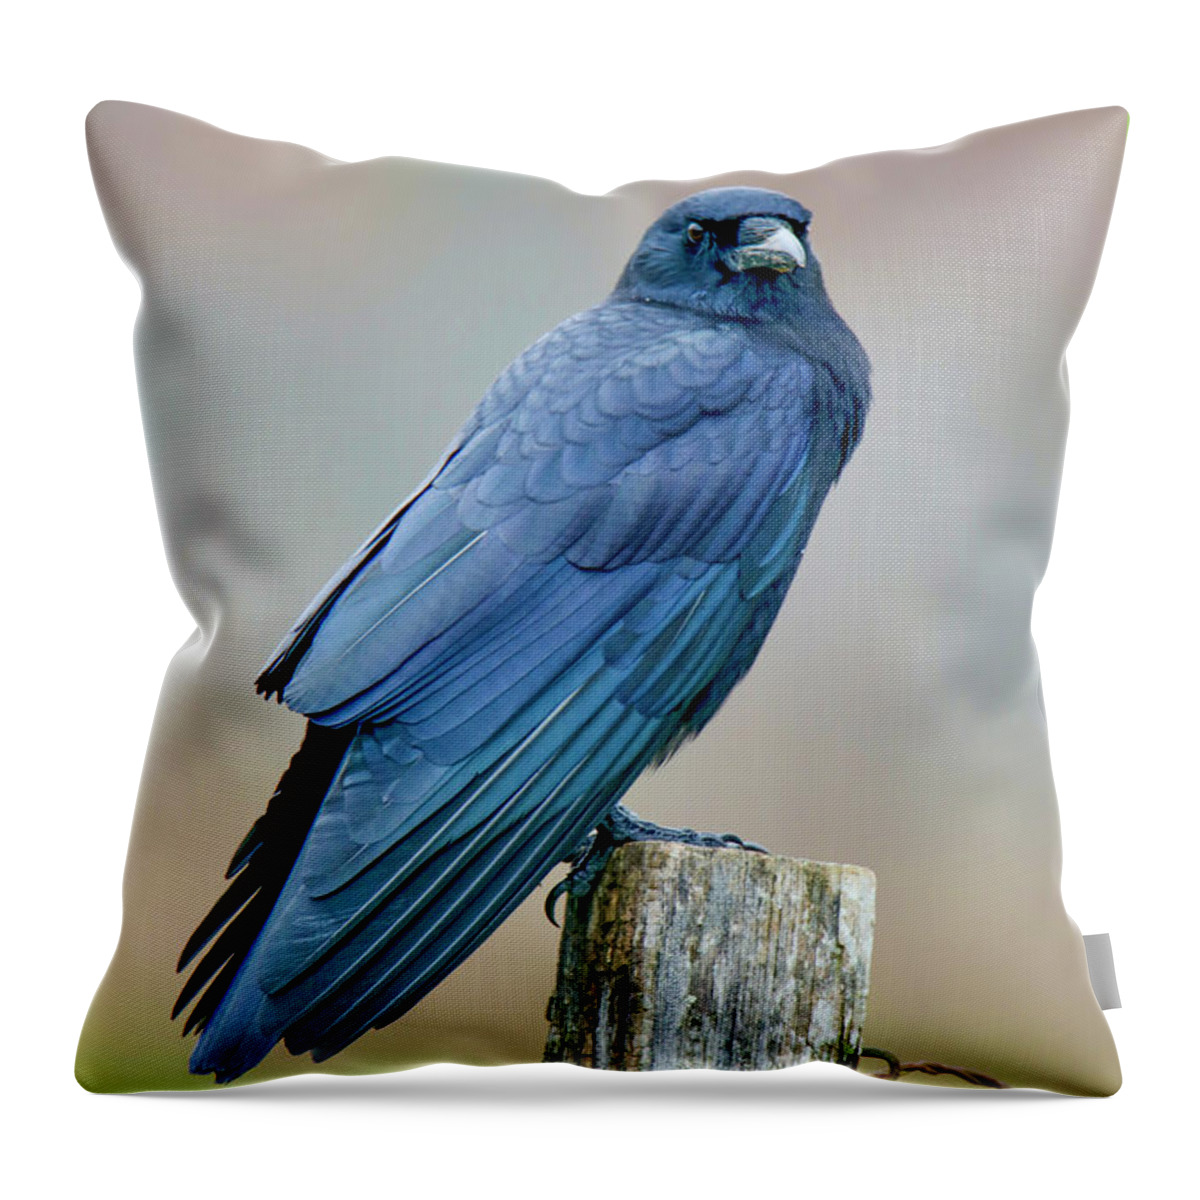 Great Smoky Mountains National Park Throw Pillow featuring the photograph Crow by Nunweiler Photography